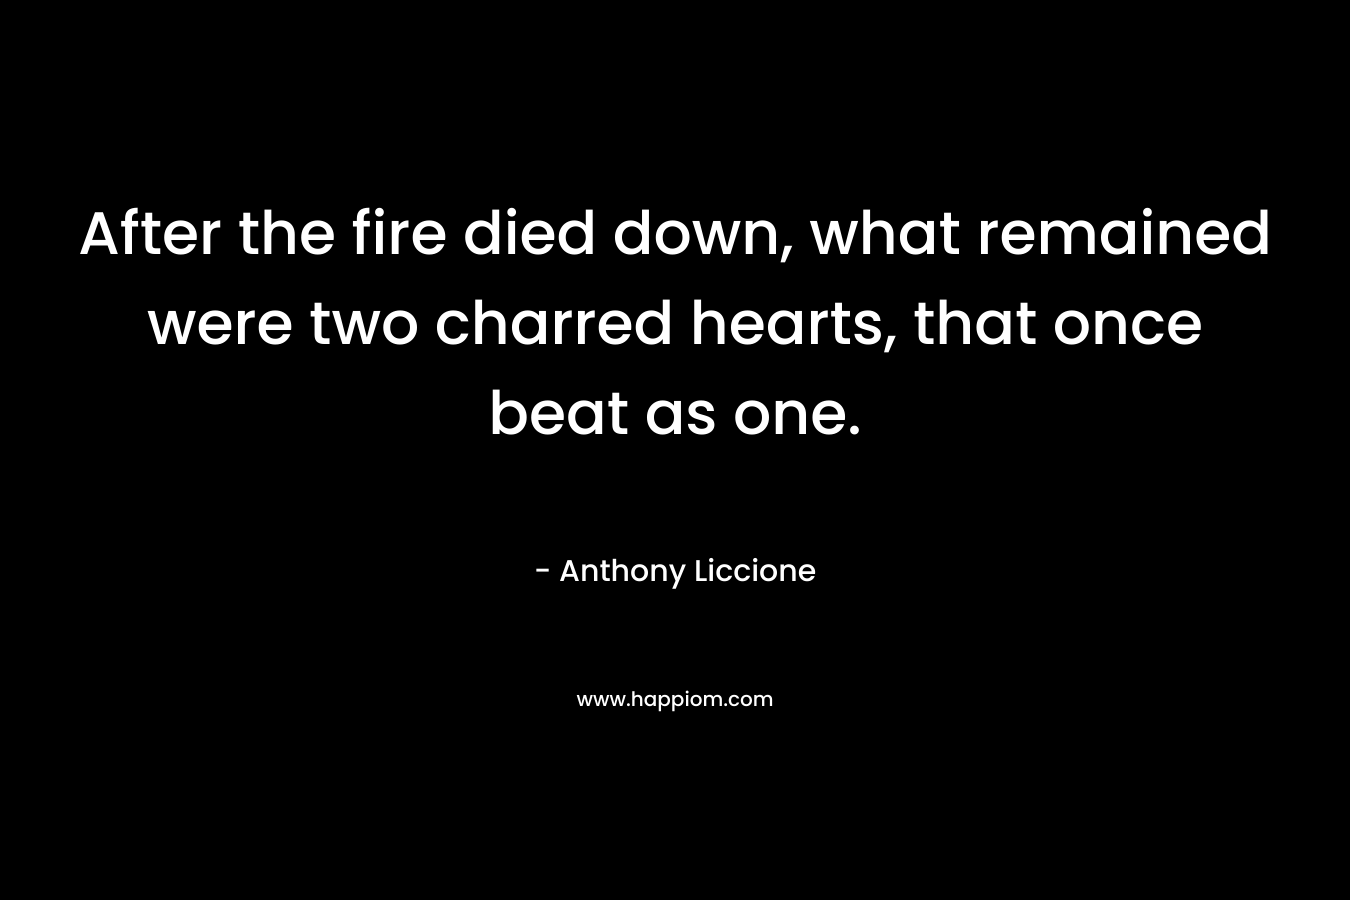 After the fire died down, what remained were two charred hearts, that once beat as one. – Anthony Liccione